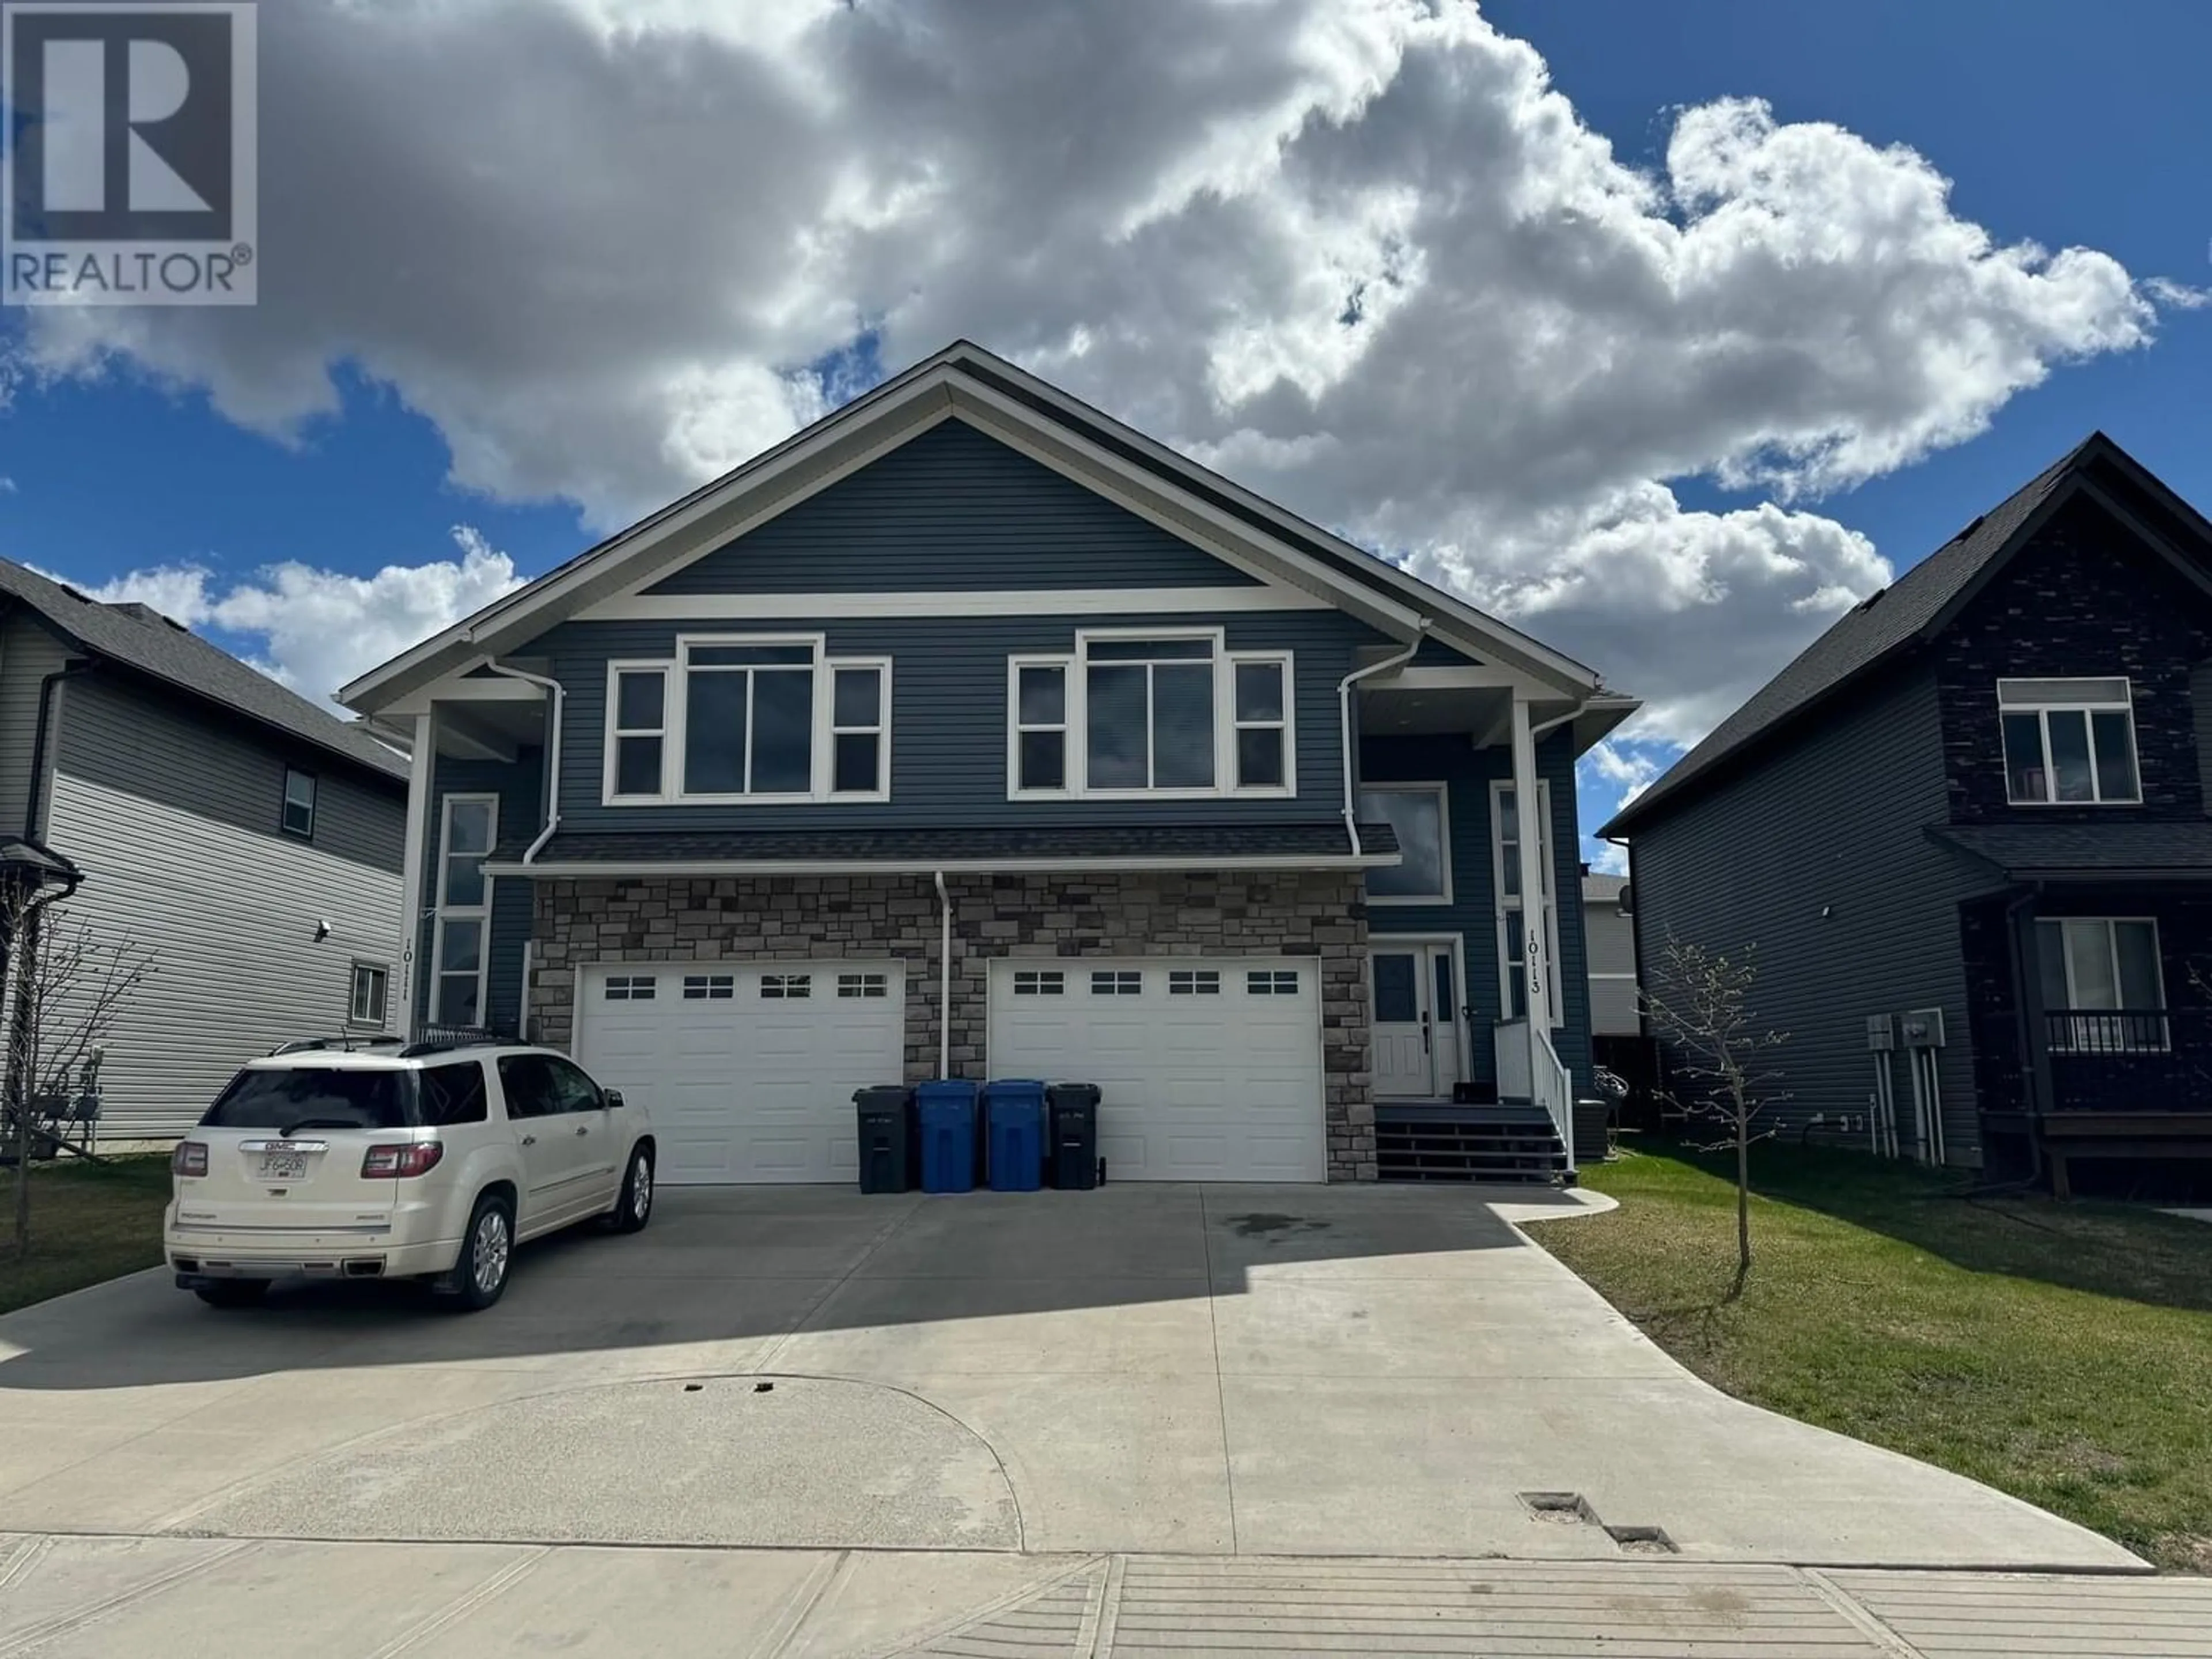 A pic from exterior of the house or condo for 10113 117 AVENUE, Fort St. John British Columbia V1J0K3